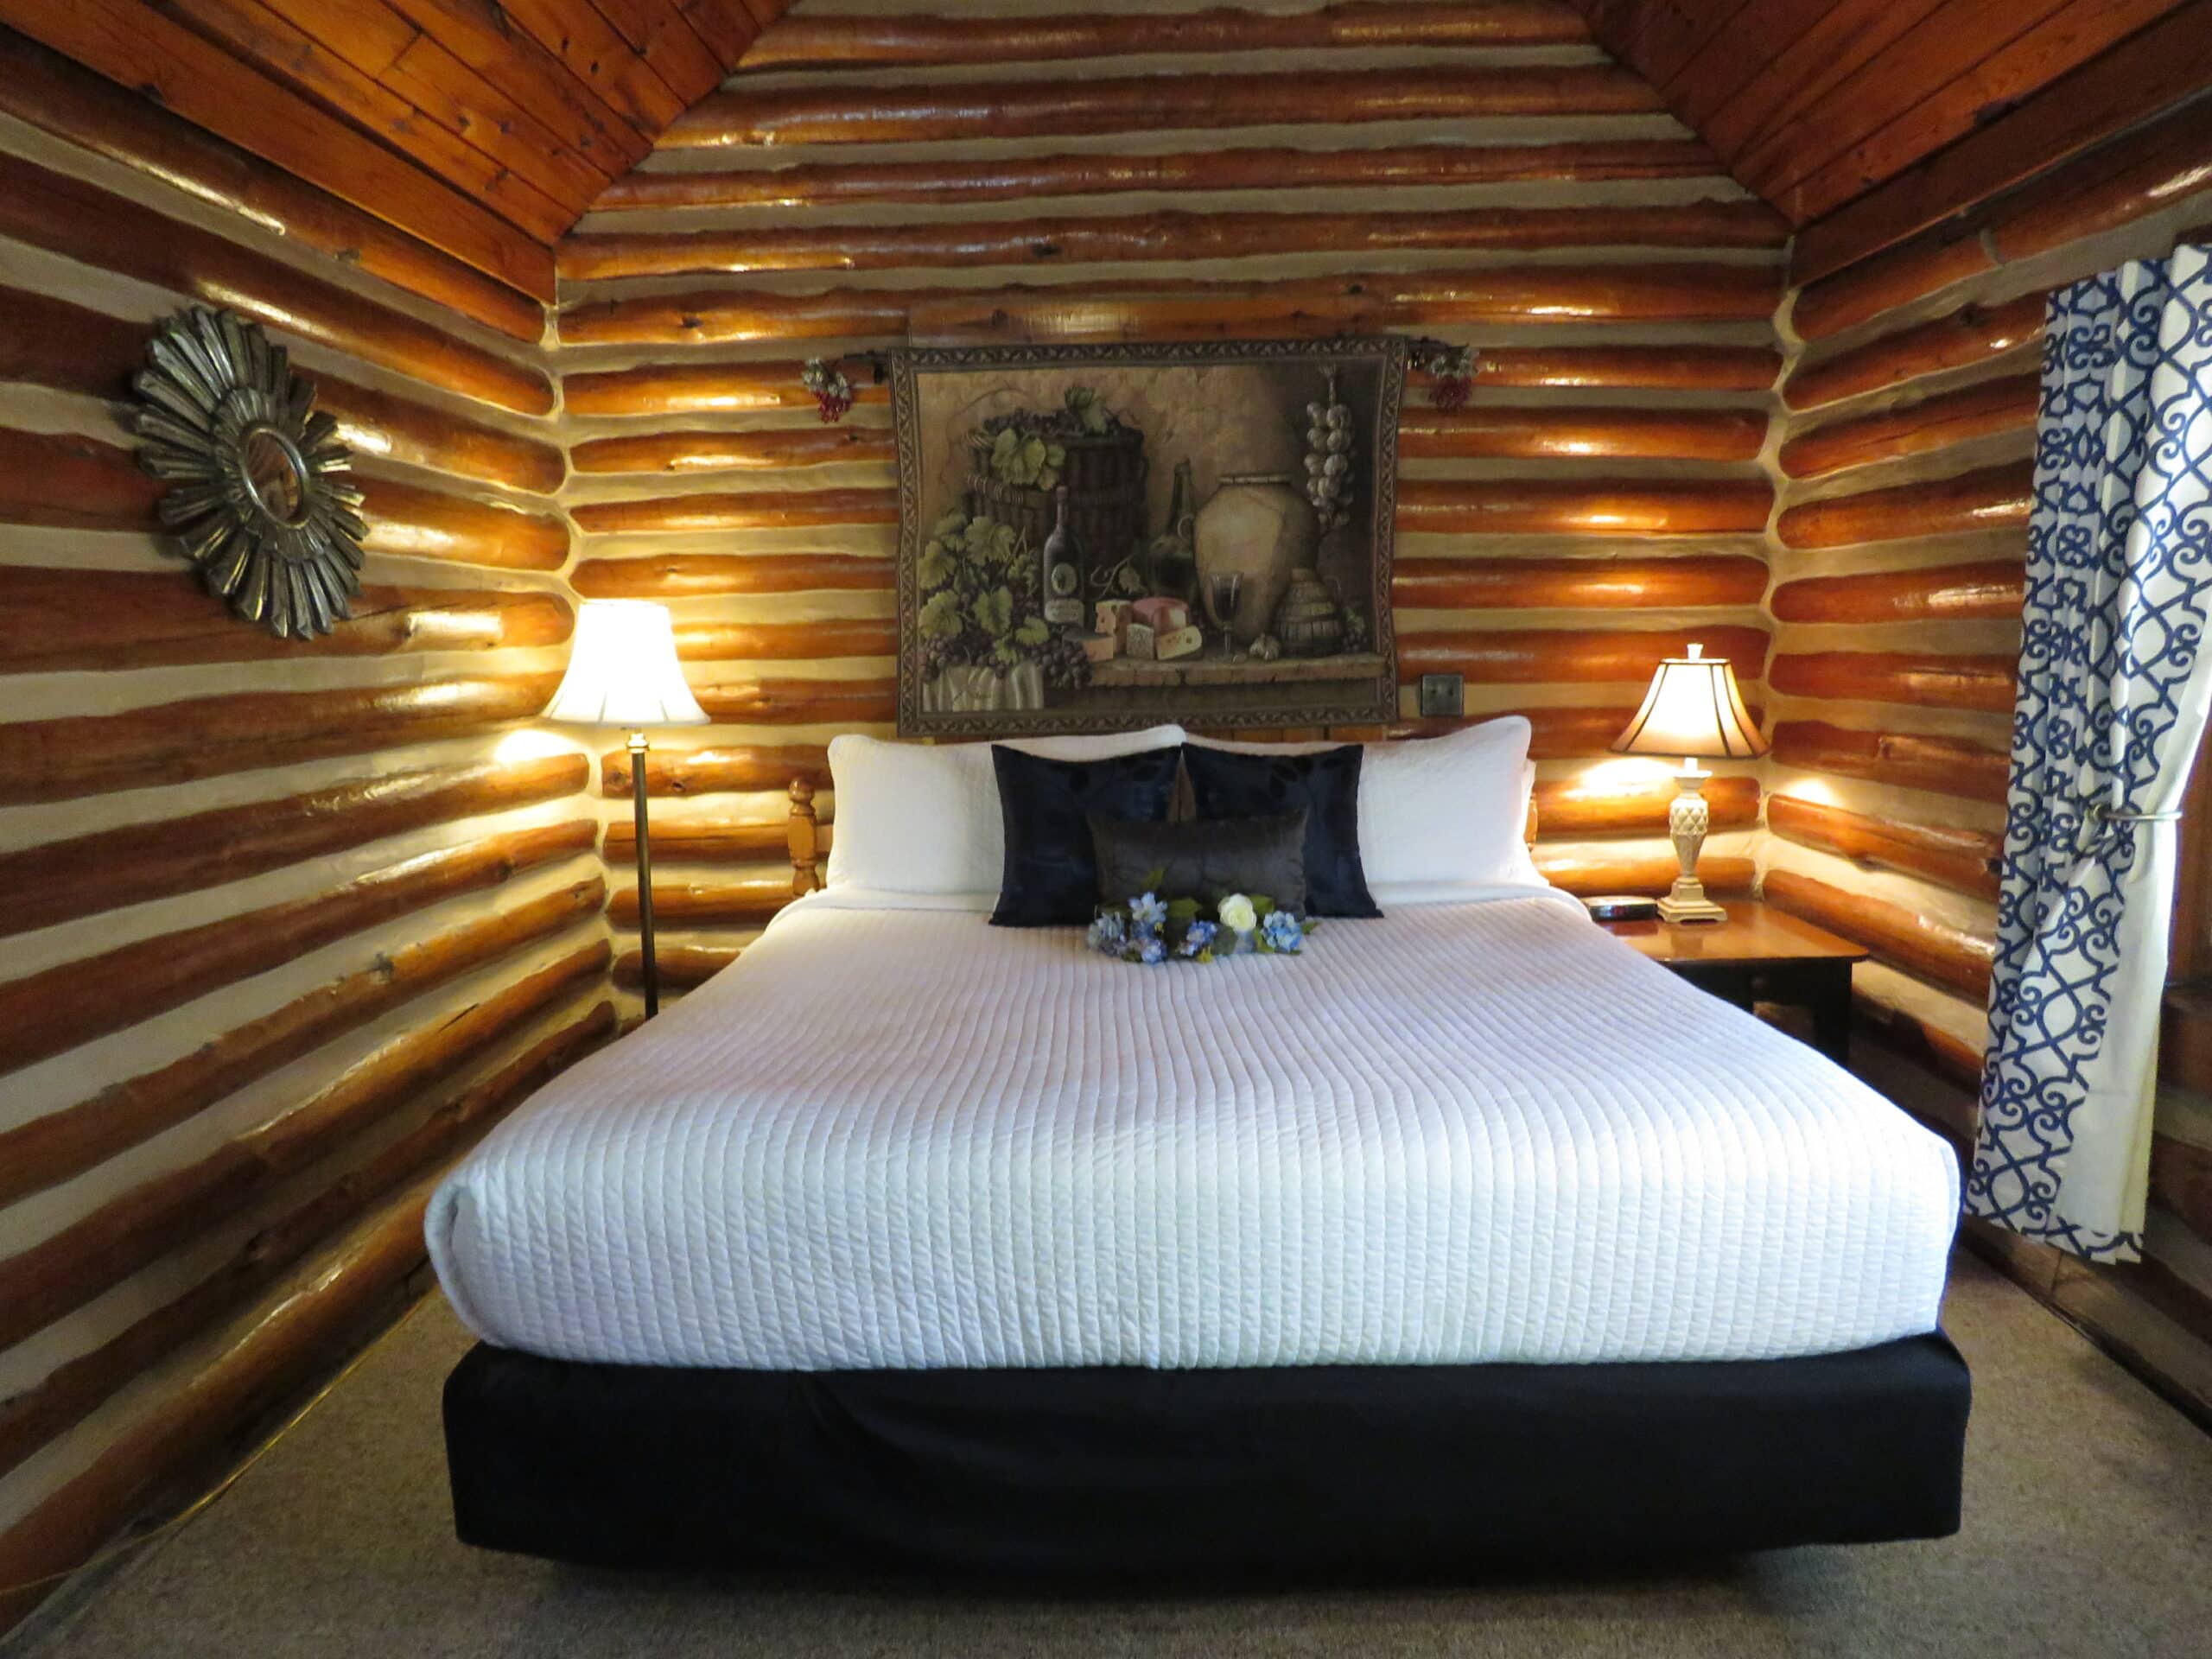 King bed in a log lodge cabin with side table lamps on